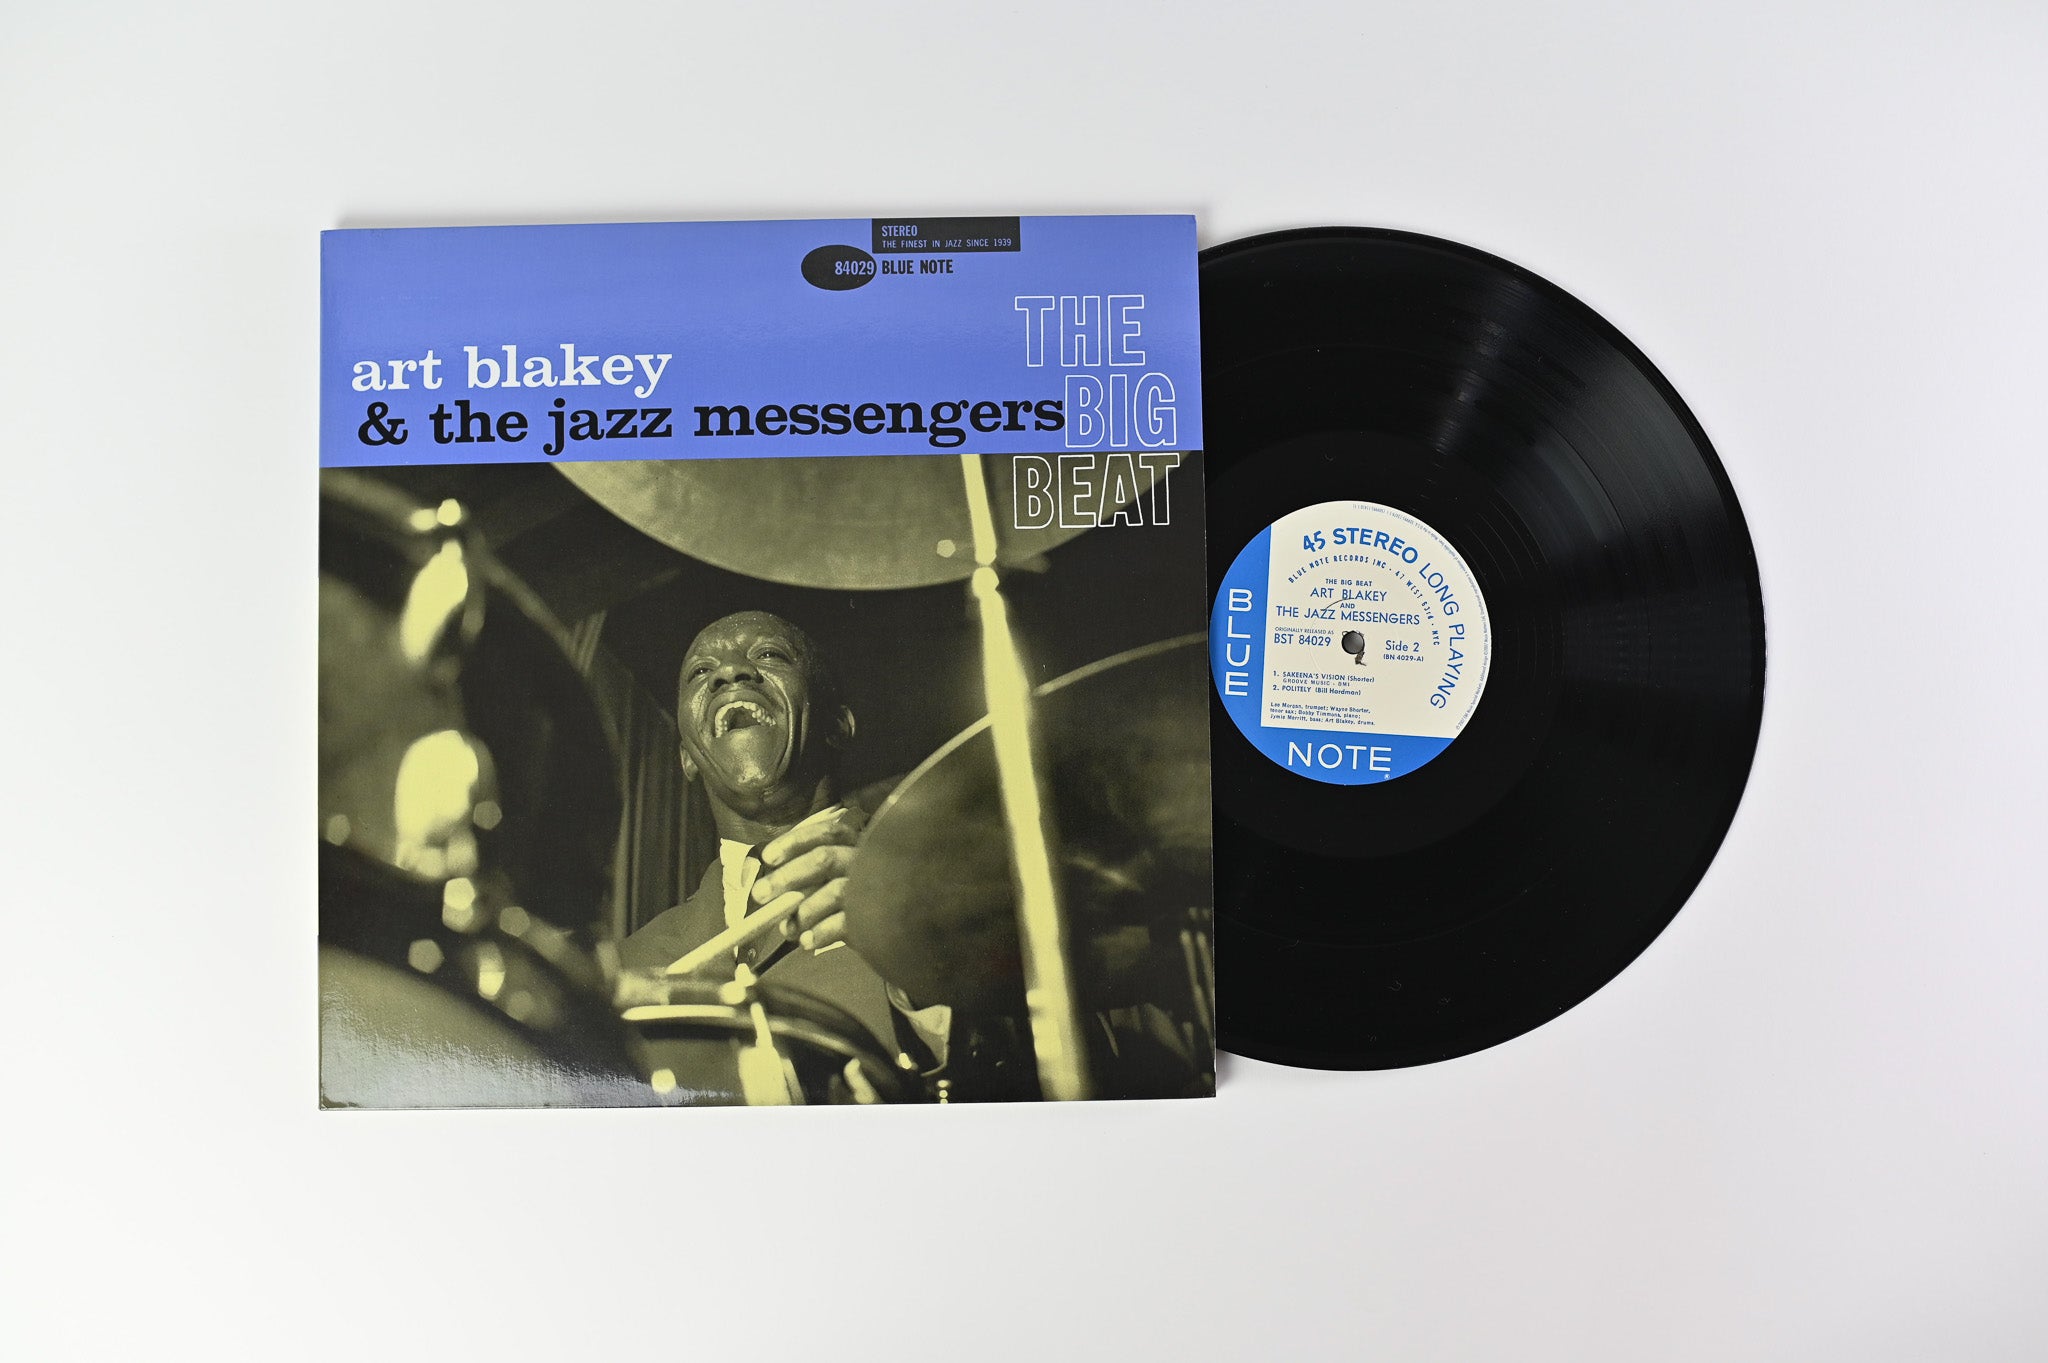 Art Blakey & The Jazz Messengers - The Big Beat on Blue Note Music Matters Ltd Reissue Numbered 45 RPM